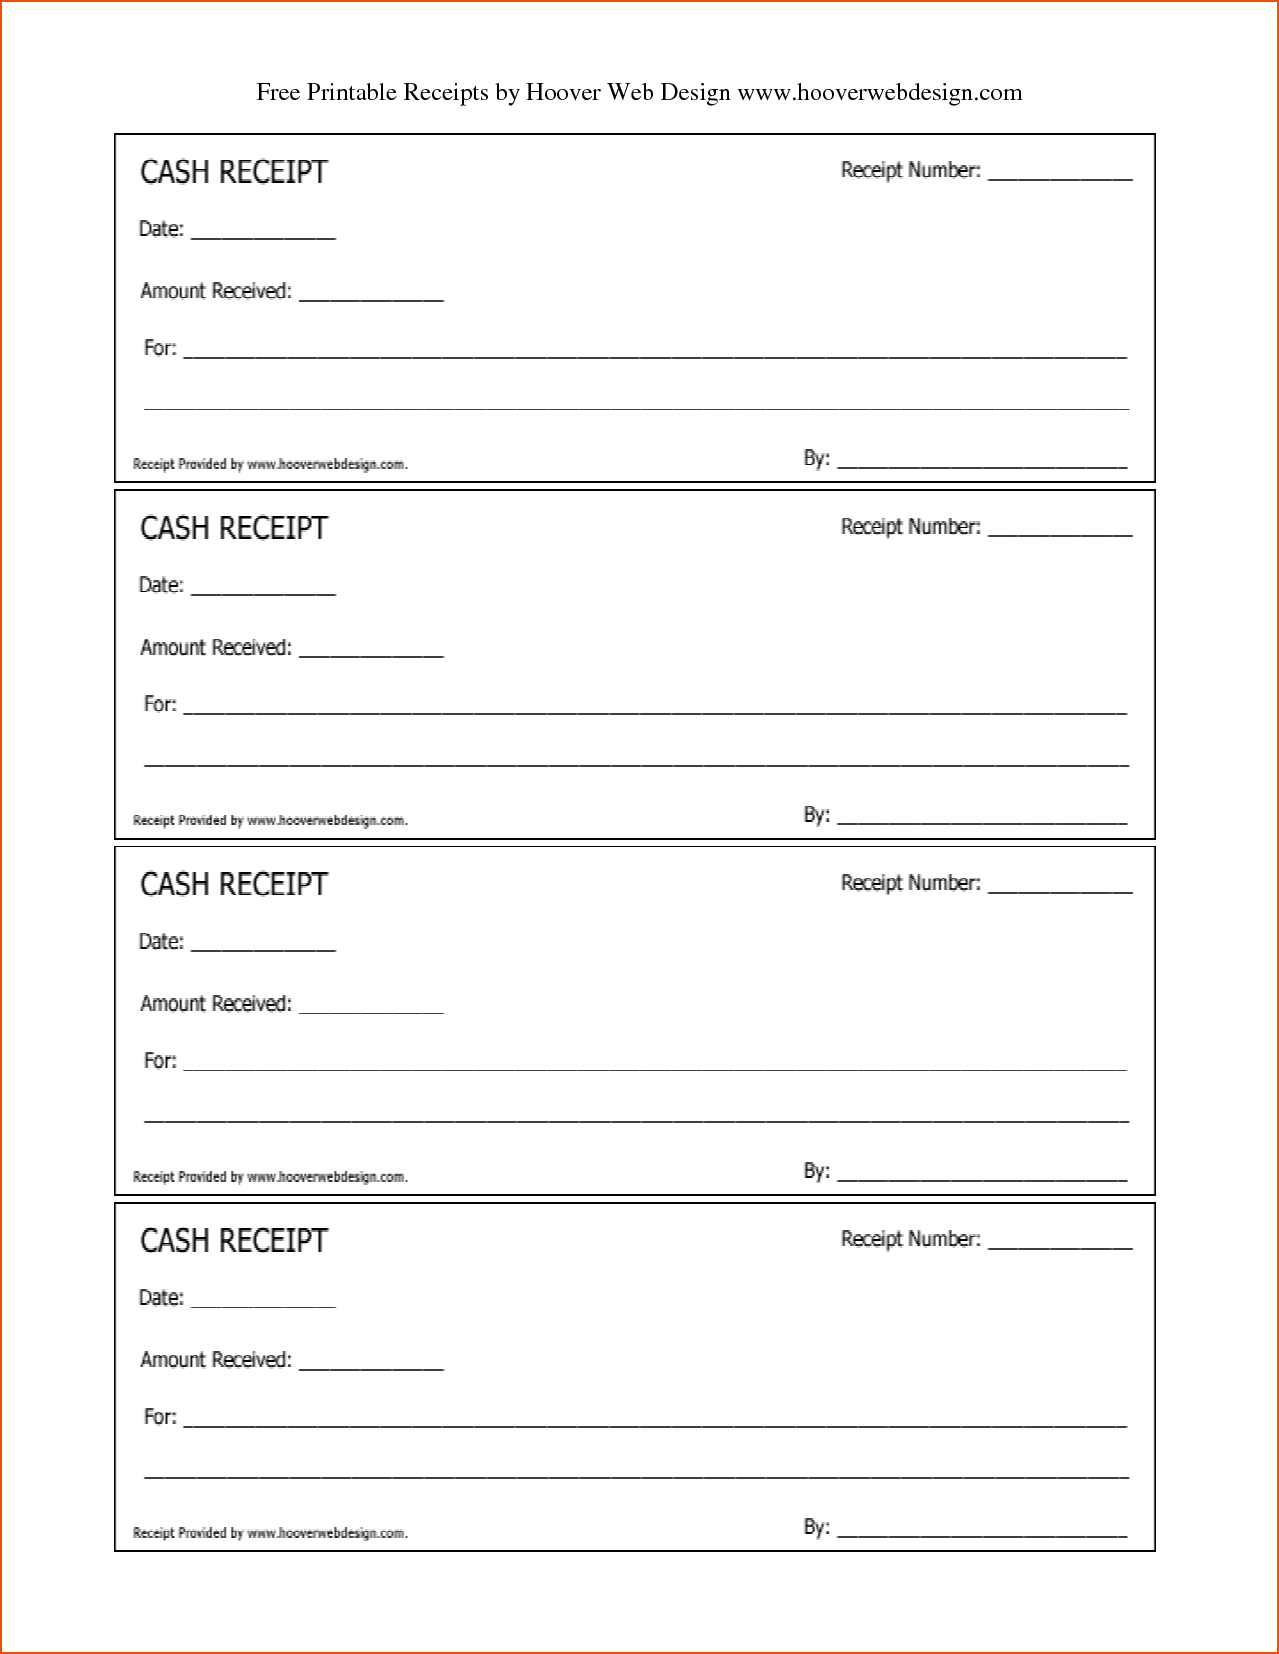 Daycare Receipt Form Denmar impulsar The Invoice And Form Template